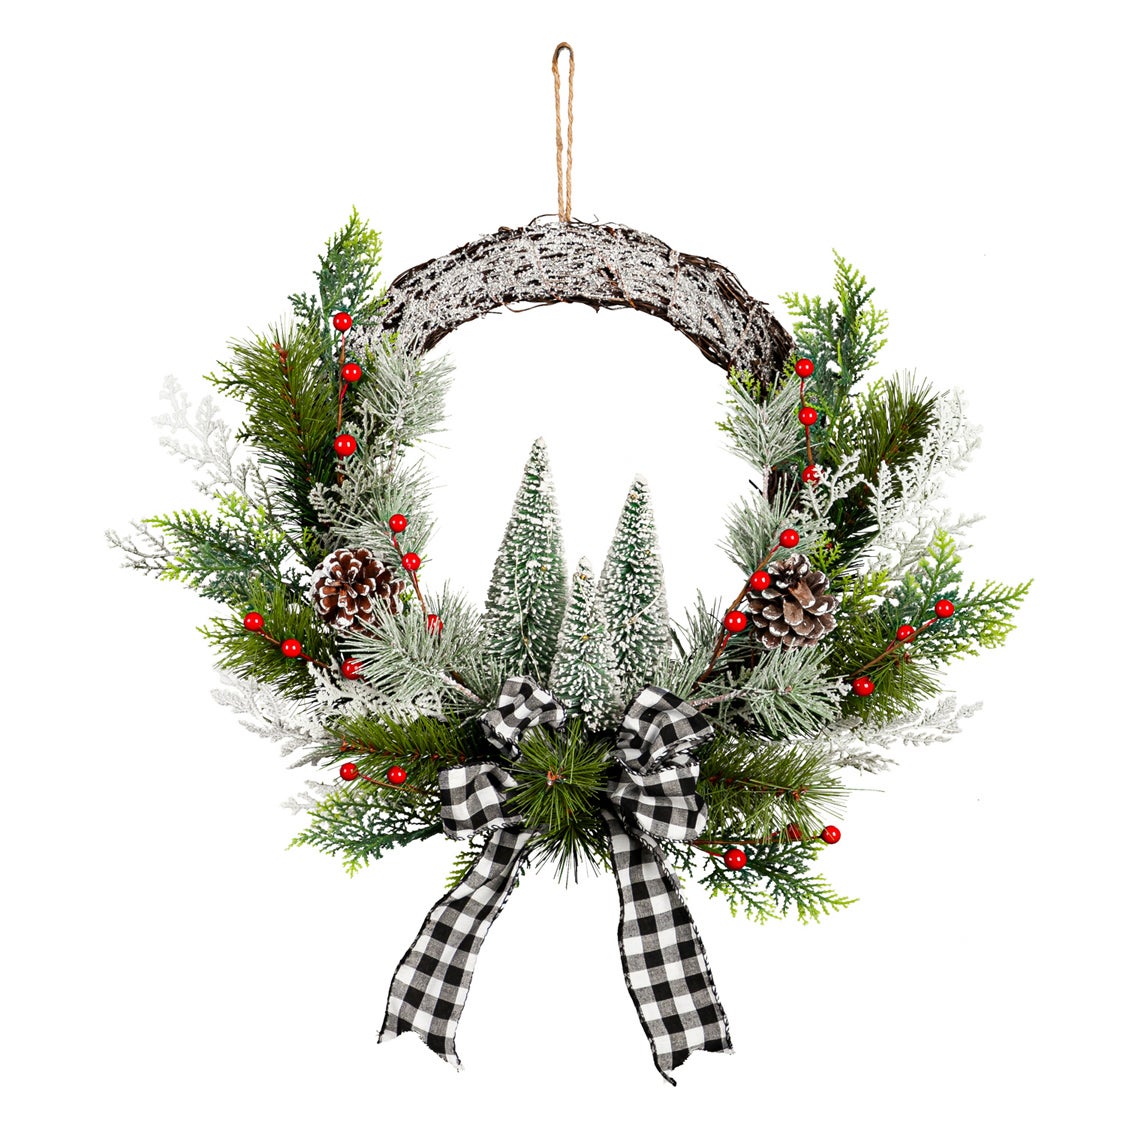 Lighted Bottle Brush Tree Wreath with Checkered Bow